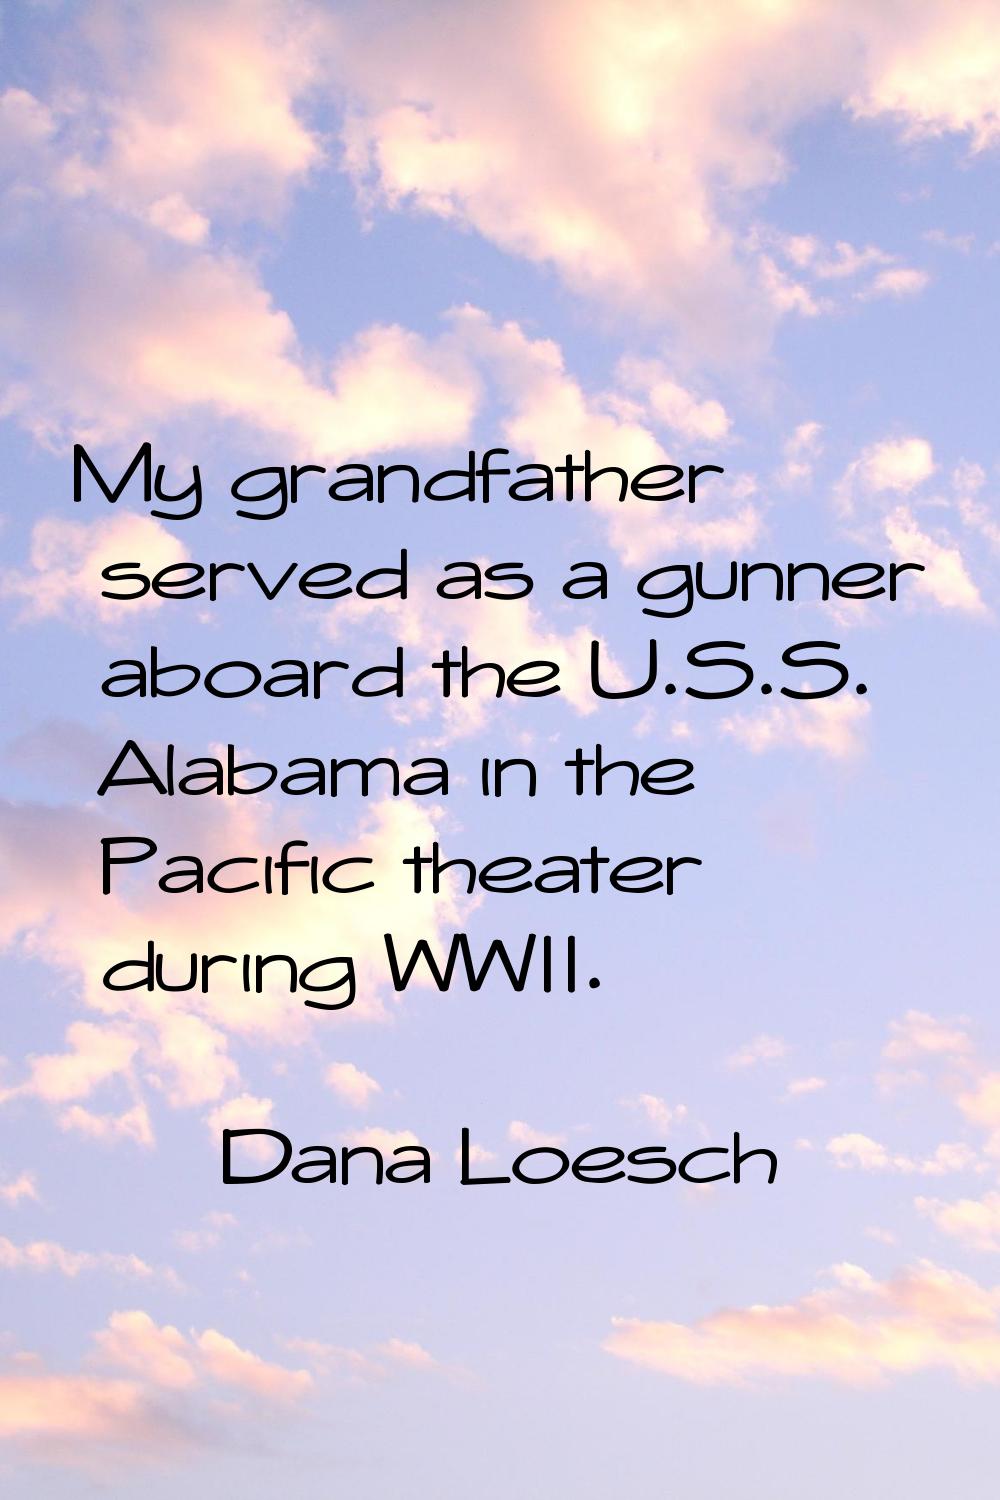 My grandfather served as a gunner aboard the U.S.S. Alabama in the Pacific theater during WWII.